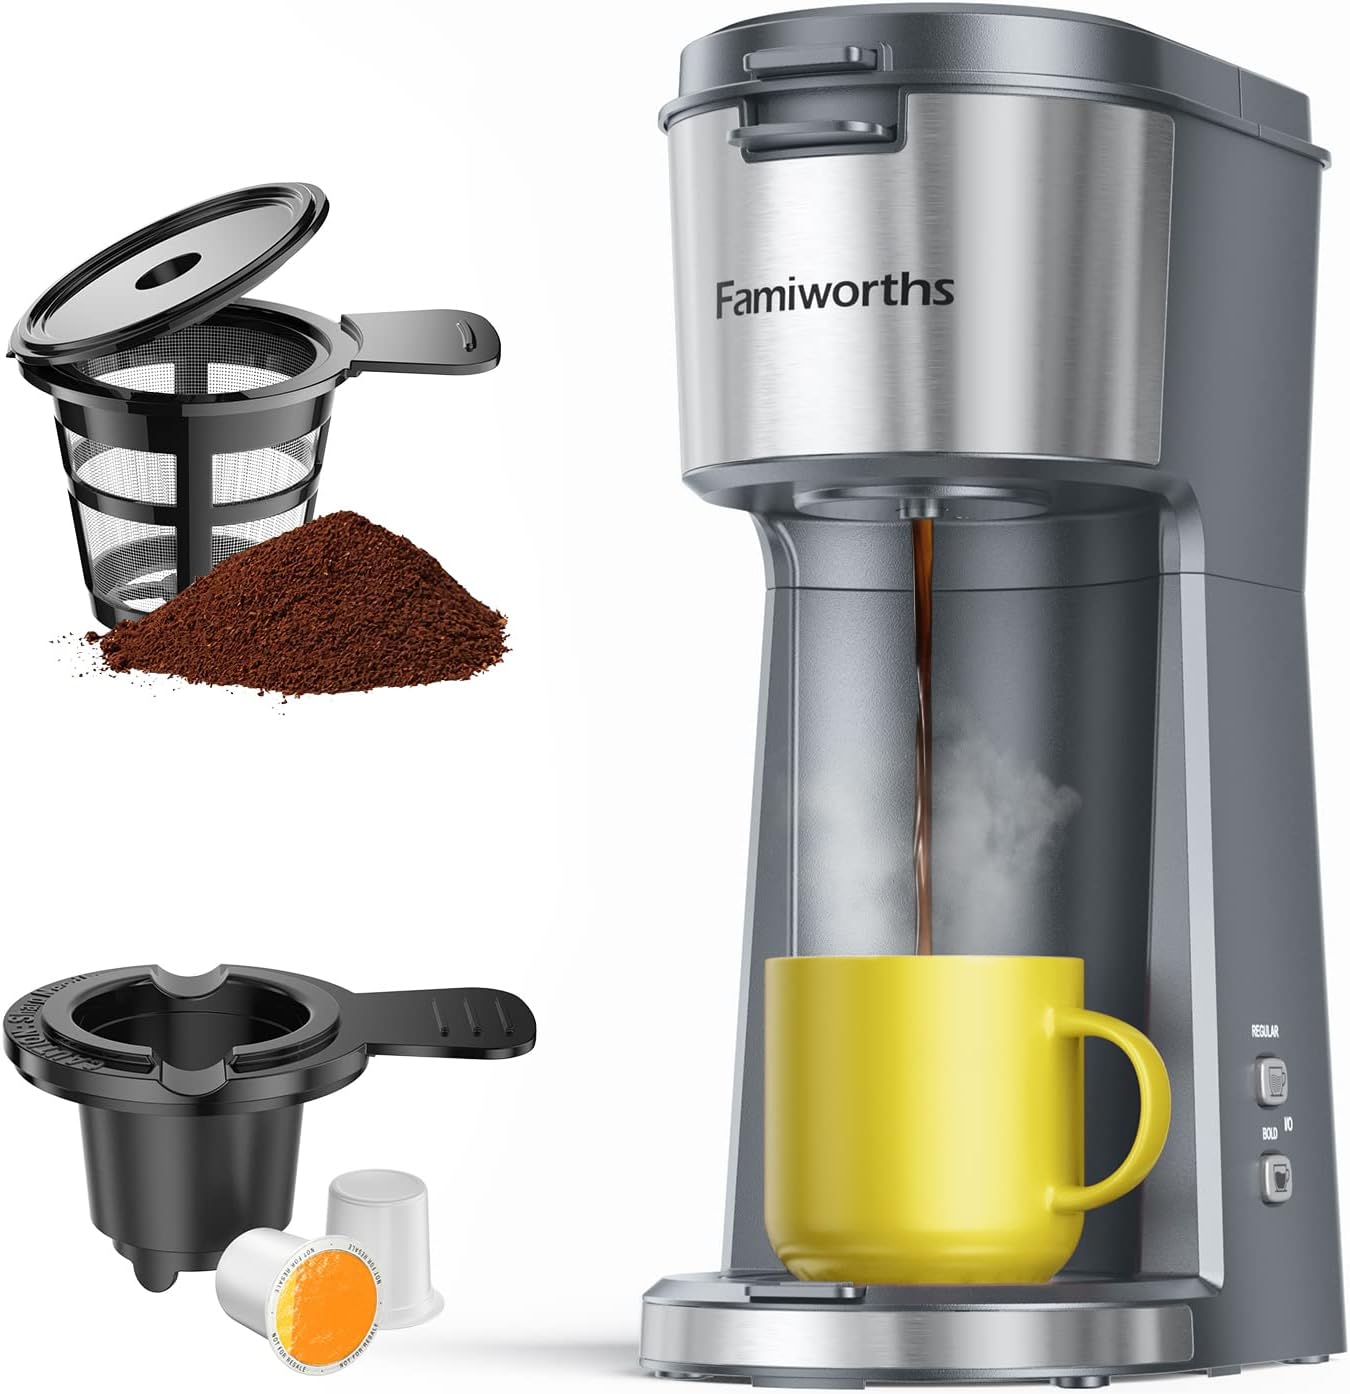 Grey coffee makers